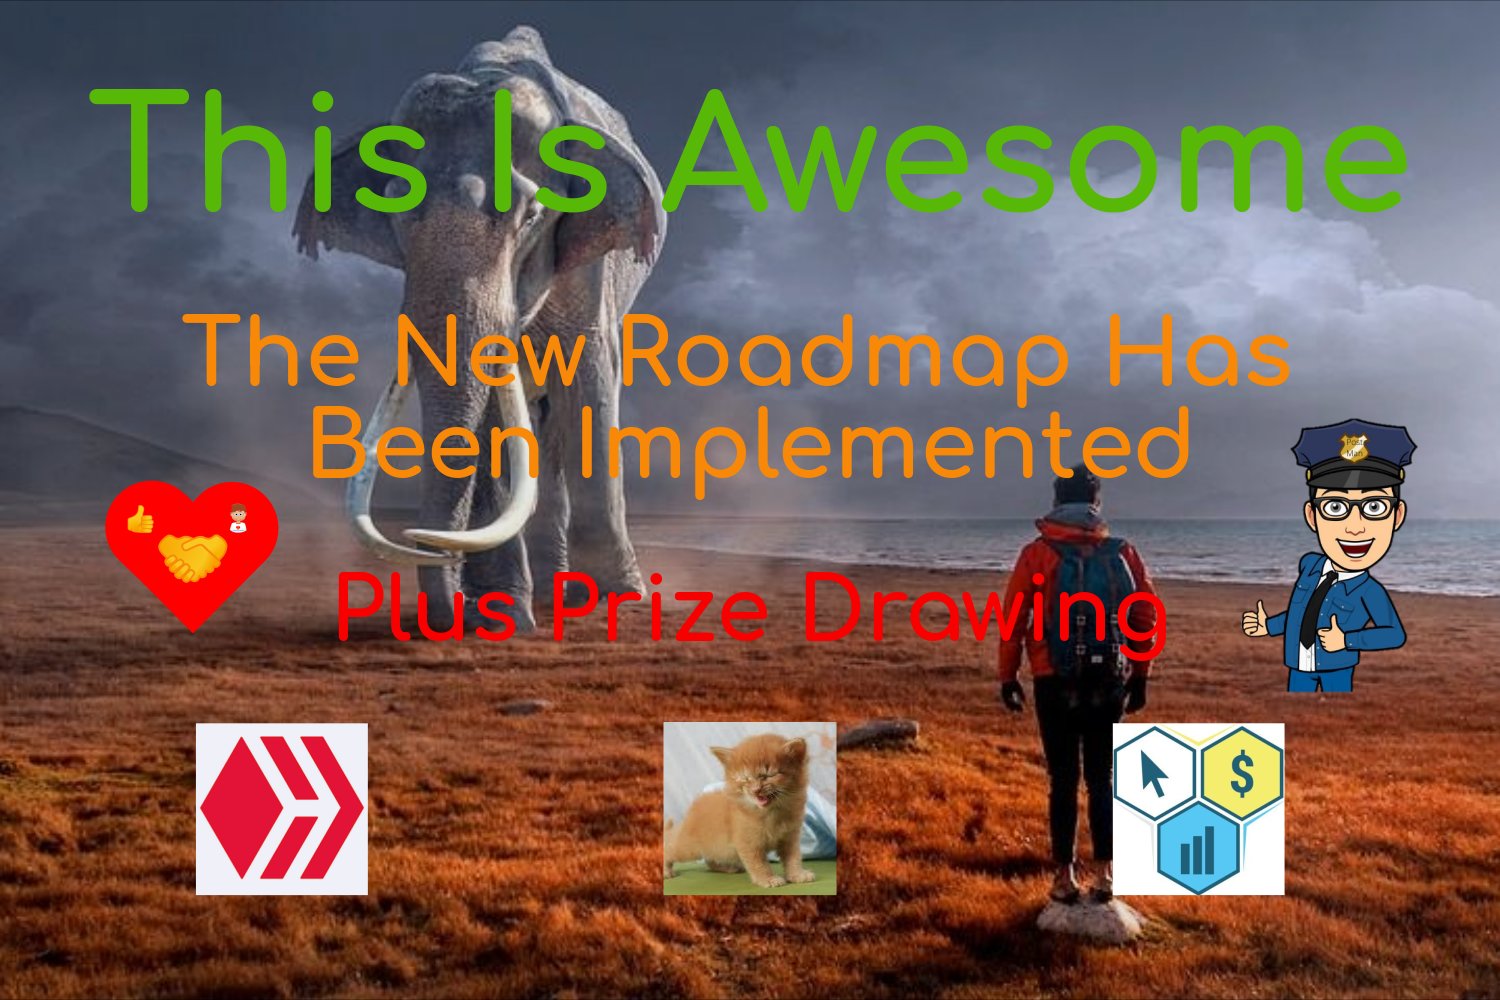 @thisisawesome/this-is-awesome-the-new-roadmap-has-been-implemented-plus-prize-drawing